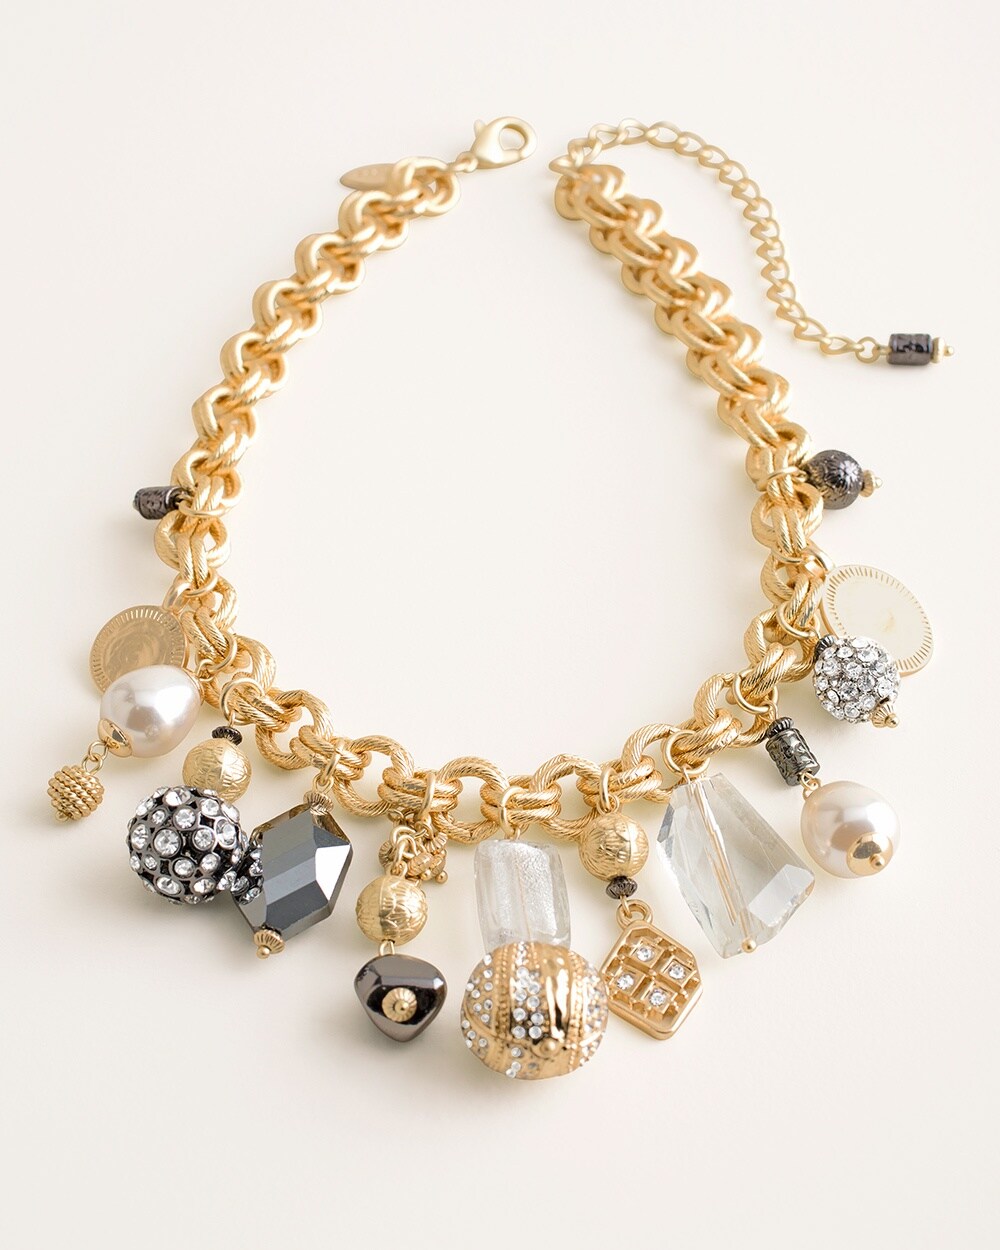 Goldtone Faux-Pearl Charm Necklace